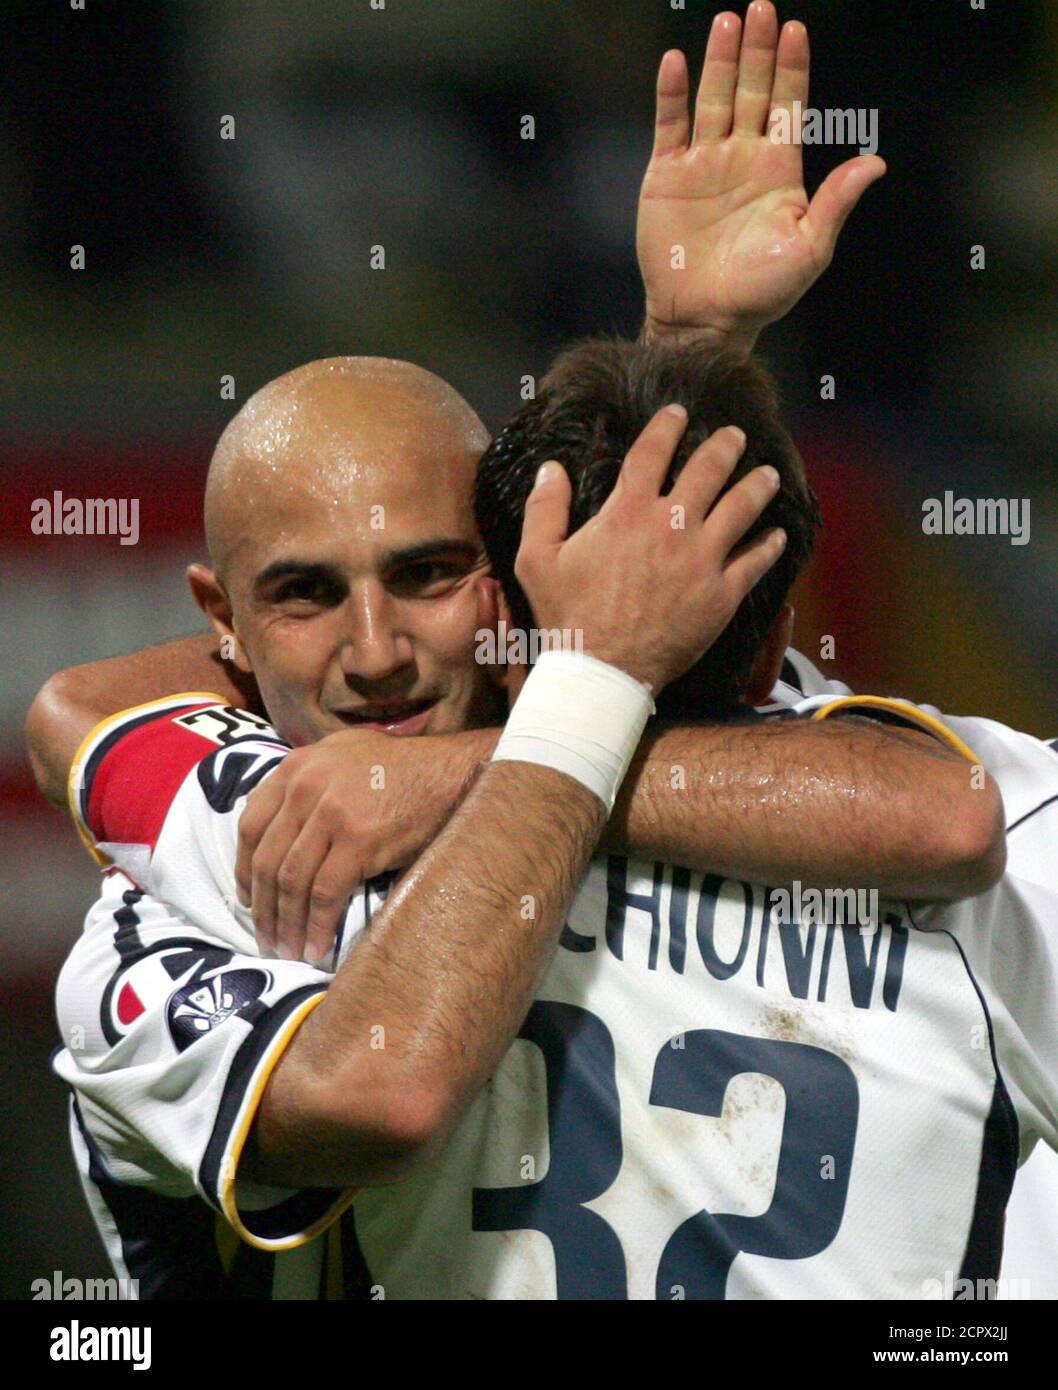 Parma's Marco Marchionni (R) celebrates with his team mate Massimo Maccarone after scoring against Maribor during their UEFA Cup first round, first leg match at the Tardini stadium in Parma, northern Italy September 16, 2004. REUTERS/Stefano Rellandini  SR/ABP Stock Photo